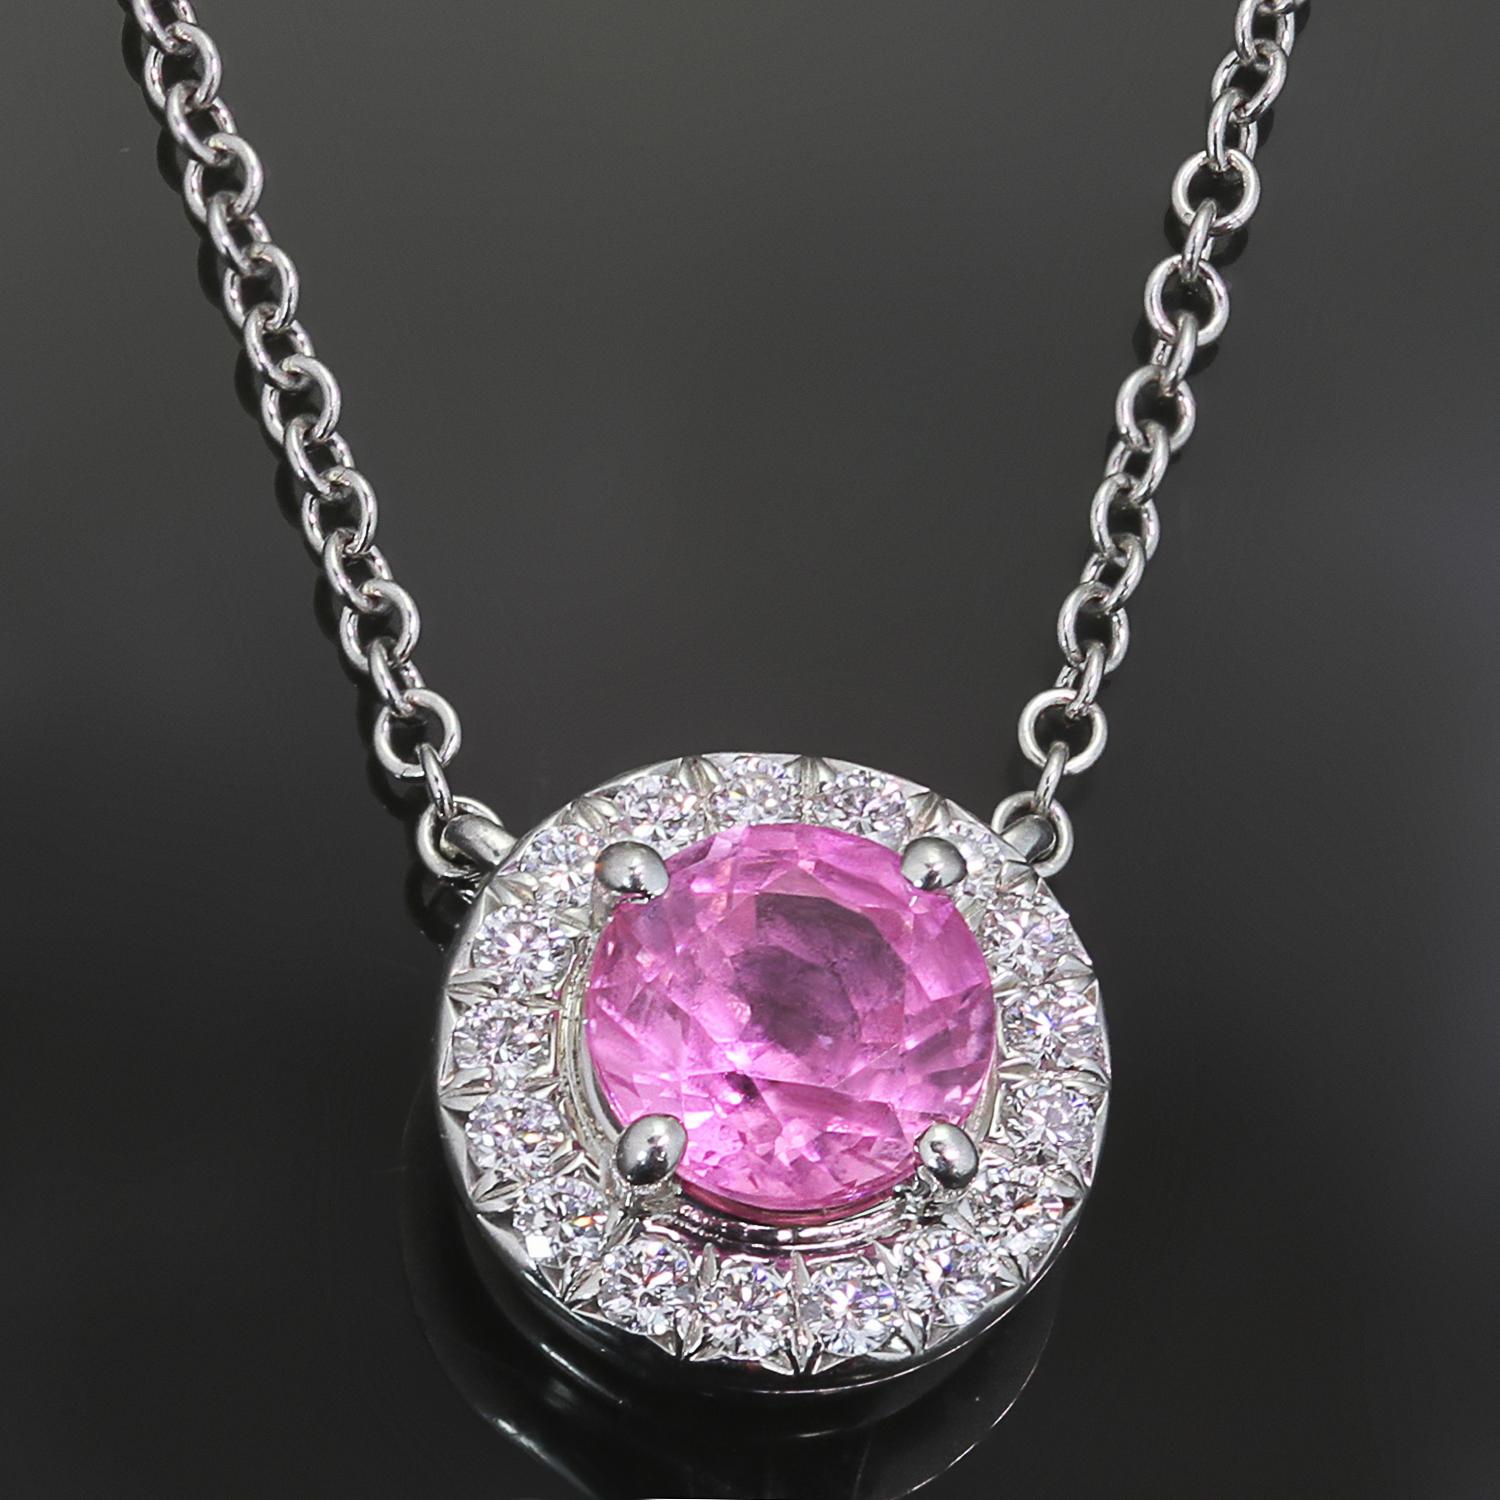 This gorgeous Tiffany & Co. necklace from the sophisticated Soleste collection is crafted in platinum and features a round pendant set with a pink sapphire weighing an estimated 0.40 carats surrounded with brilliant-cut round diamonds weighing an